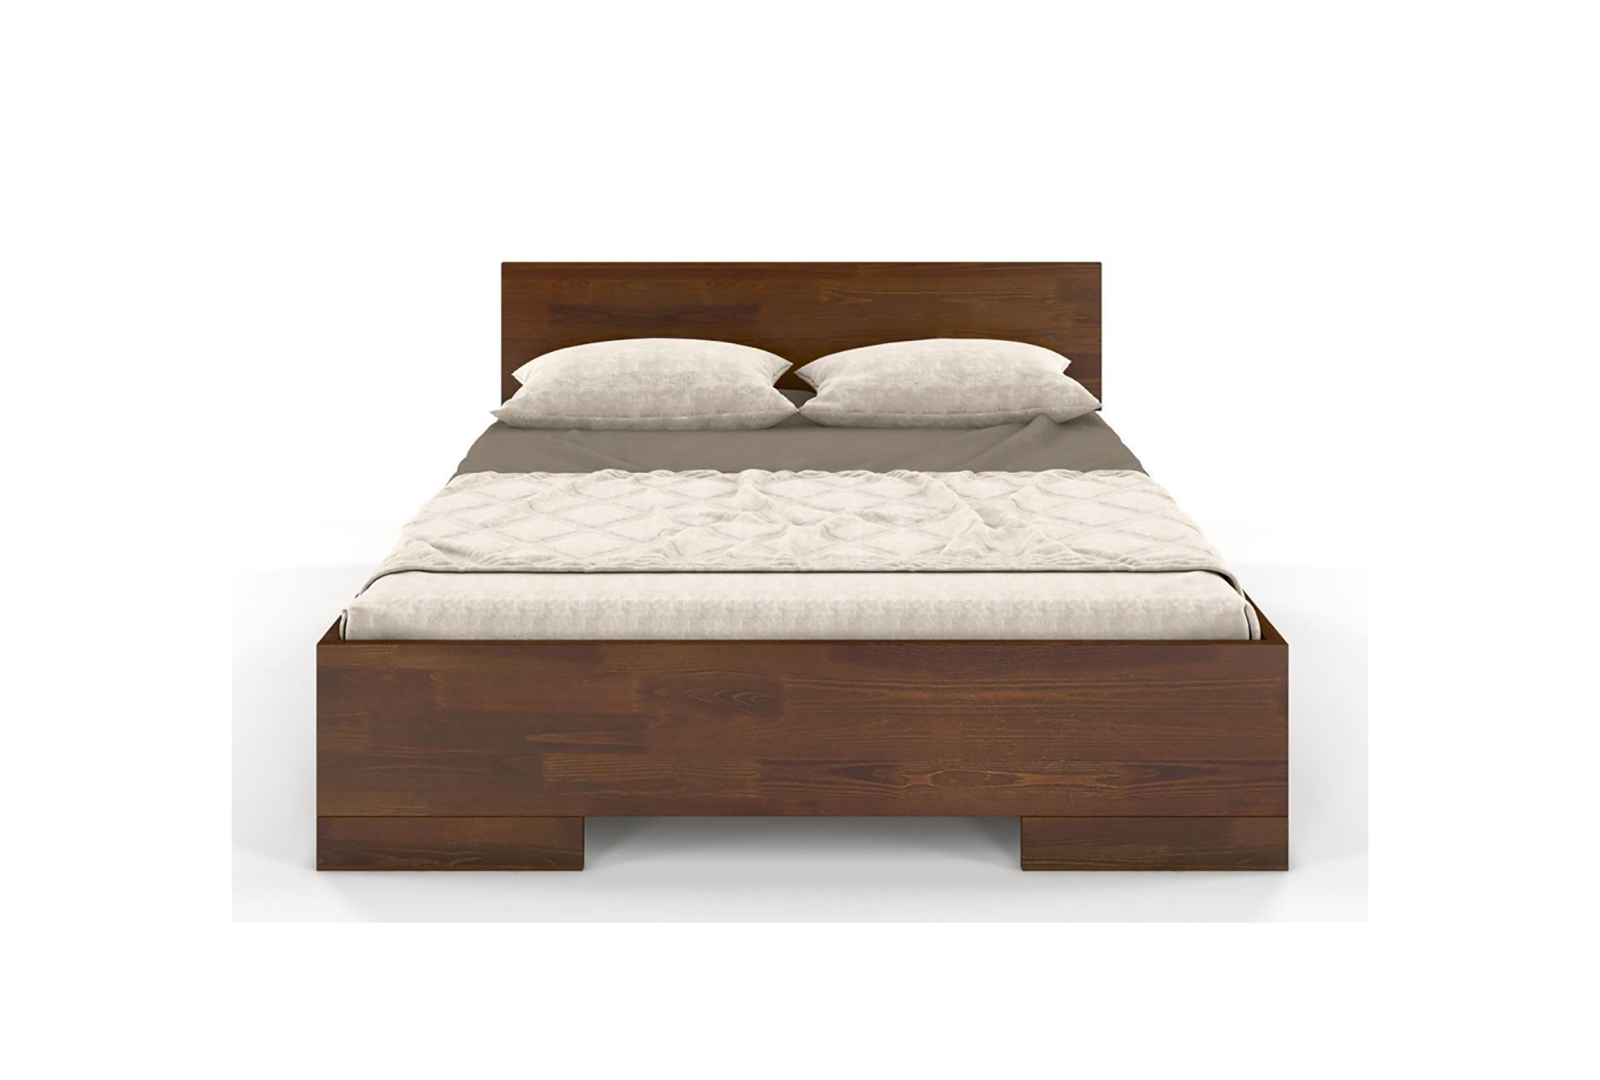 WOODEN PINE BED WITH A BOX FOR BEDDING SKANDICA SPECTRUM MAXI AND LONG ST